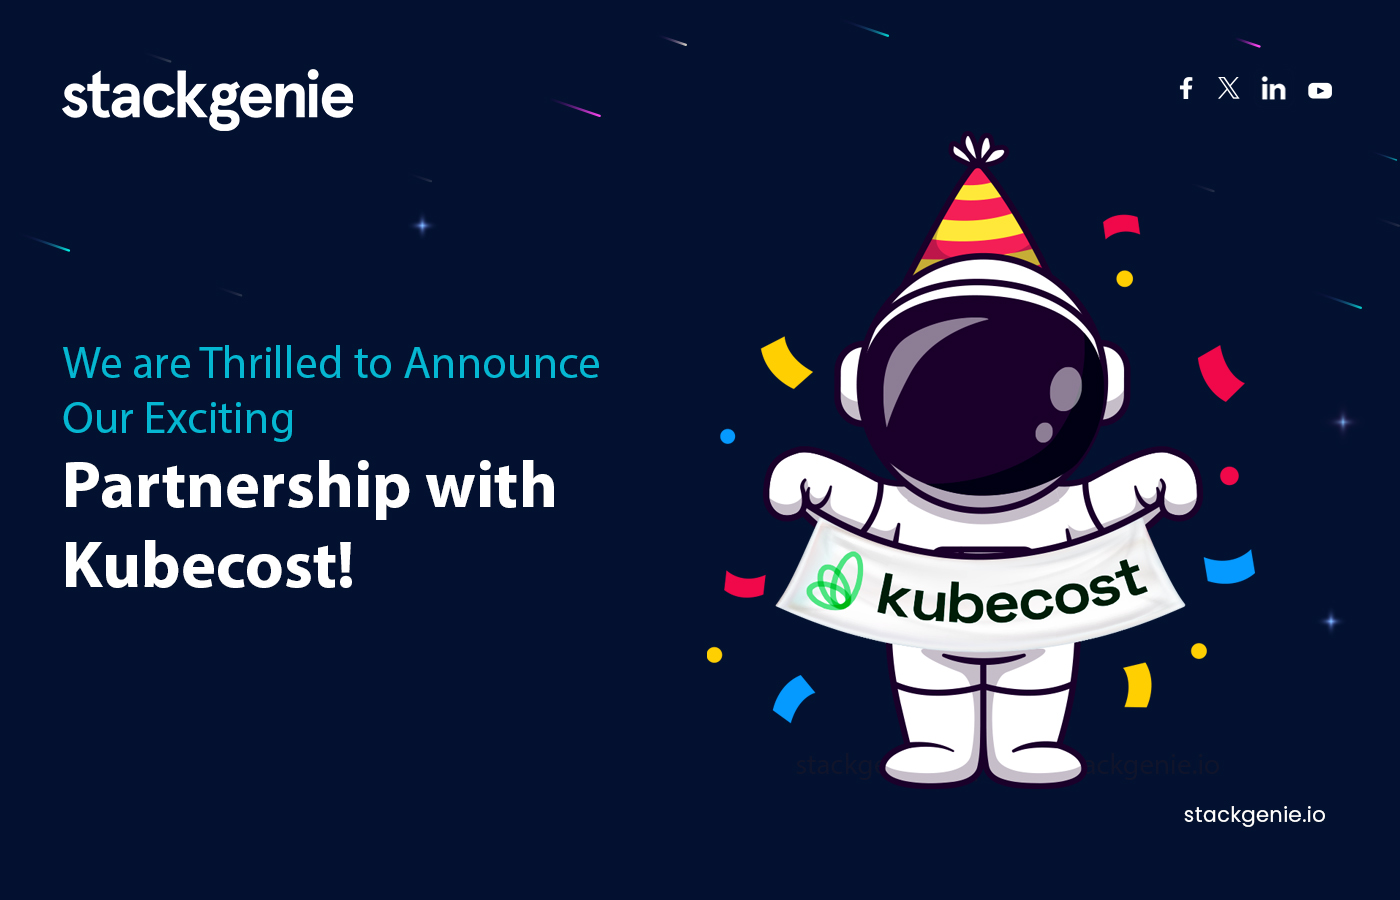 We are thrilled to announce our exciting partnership with Kubecost!